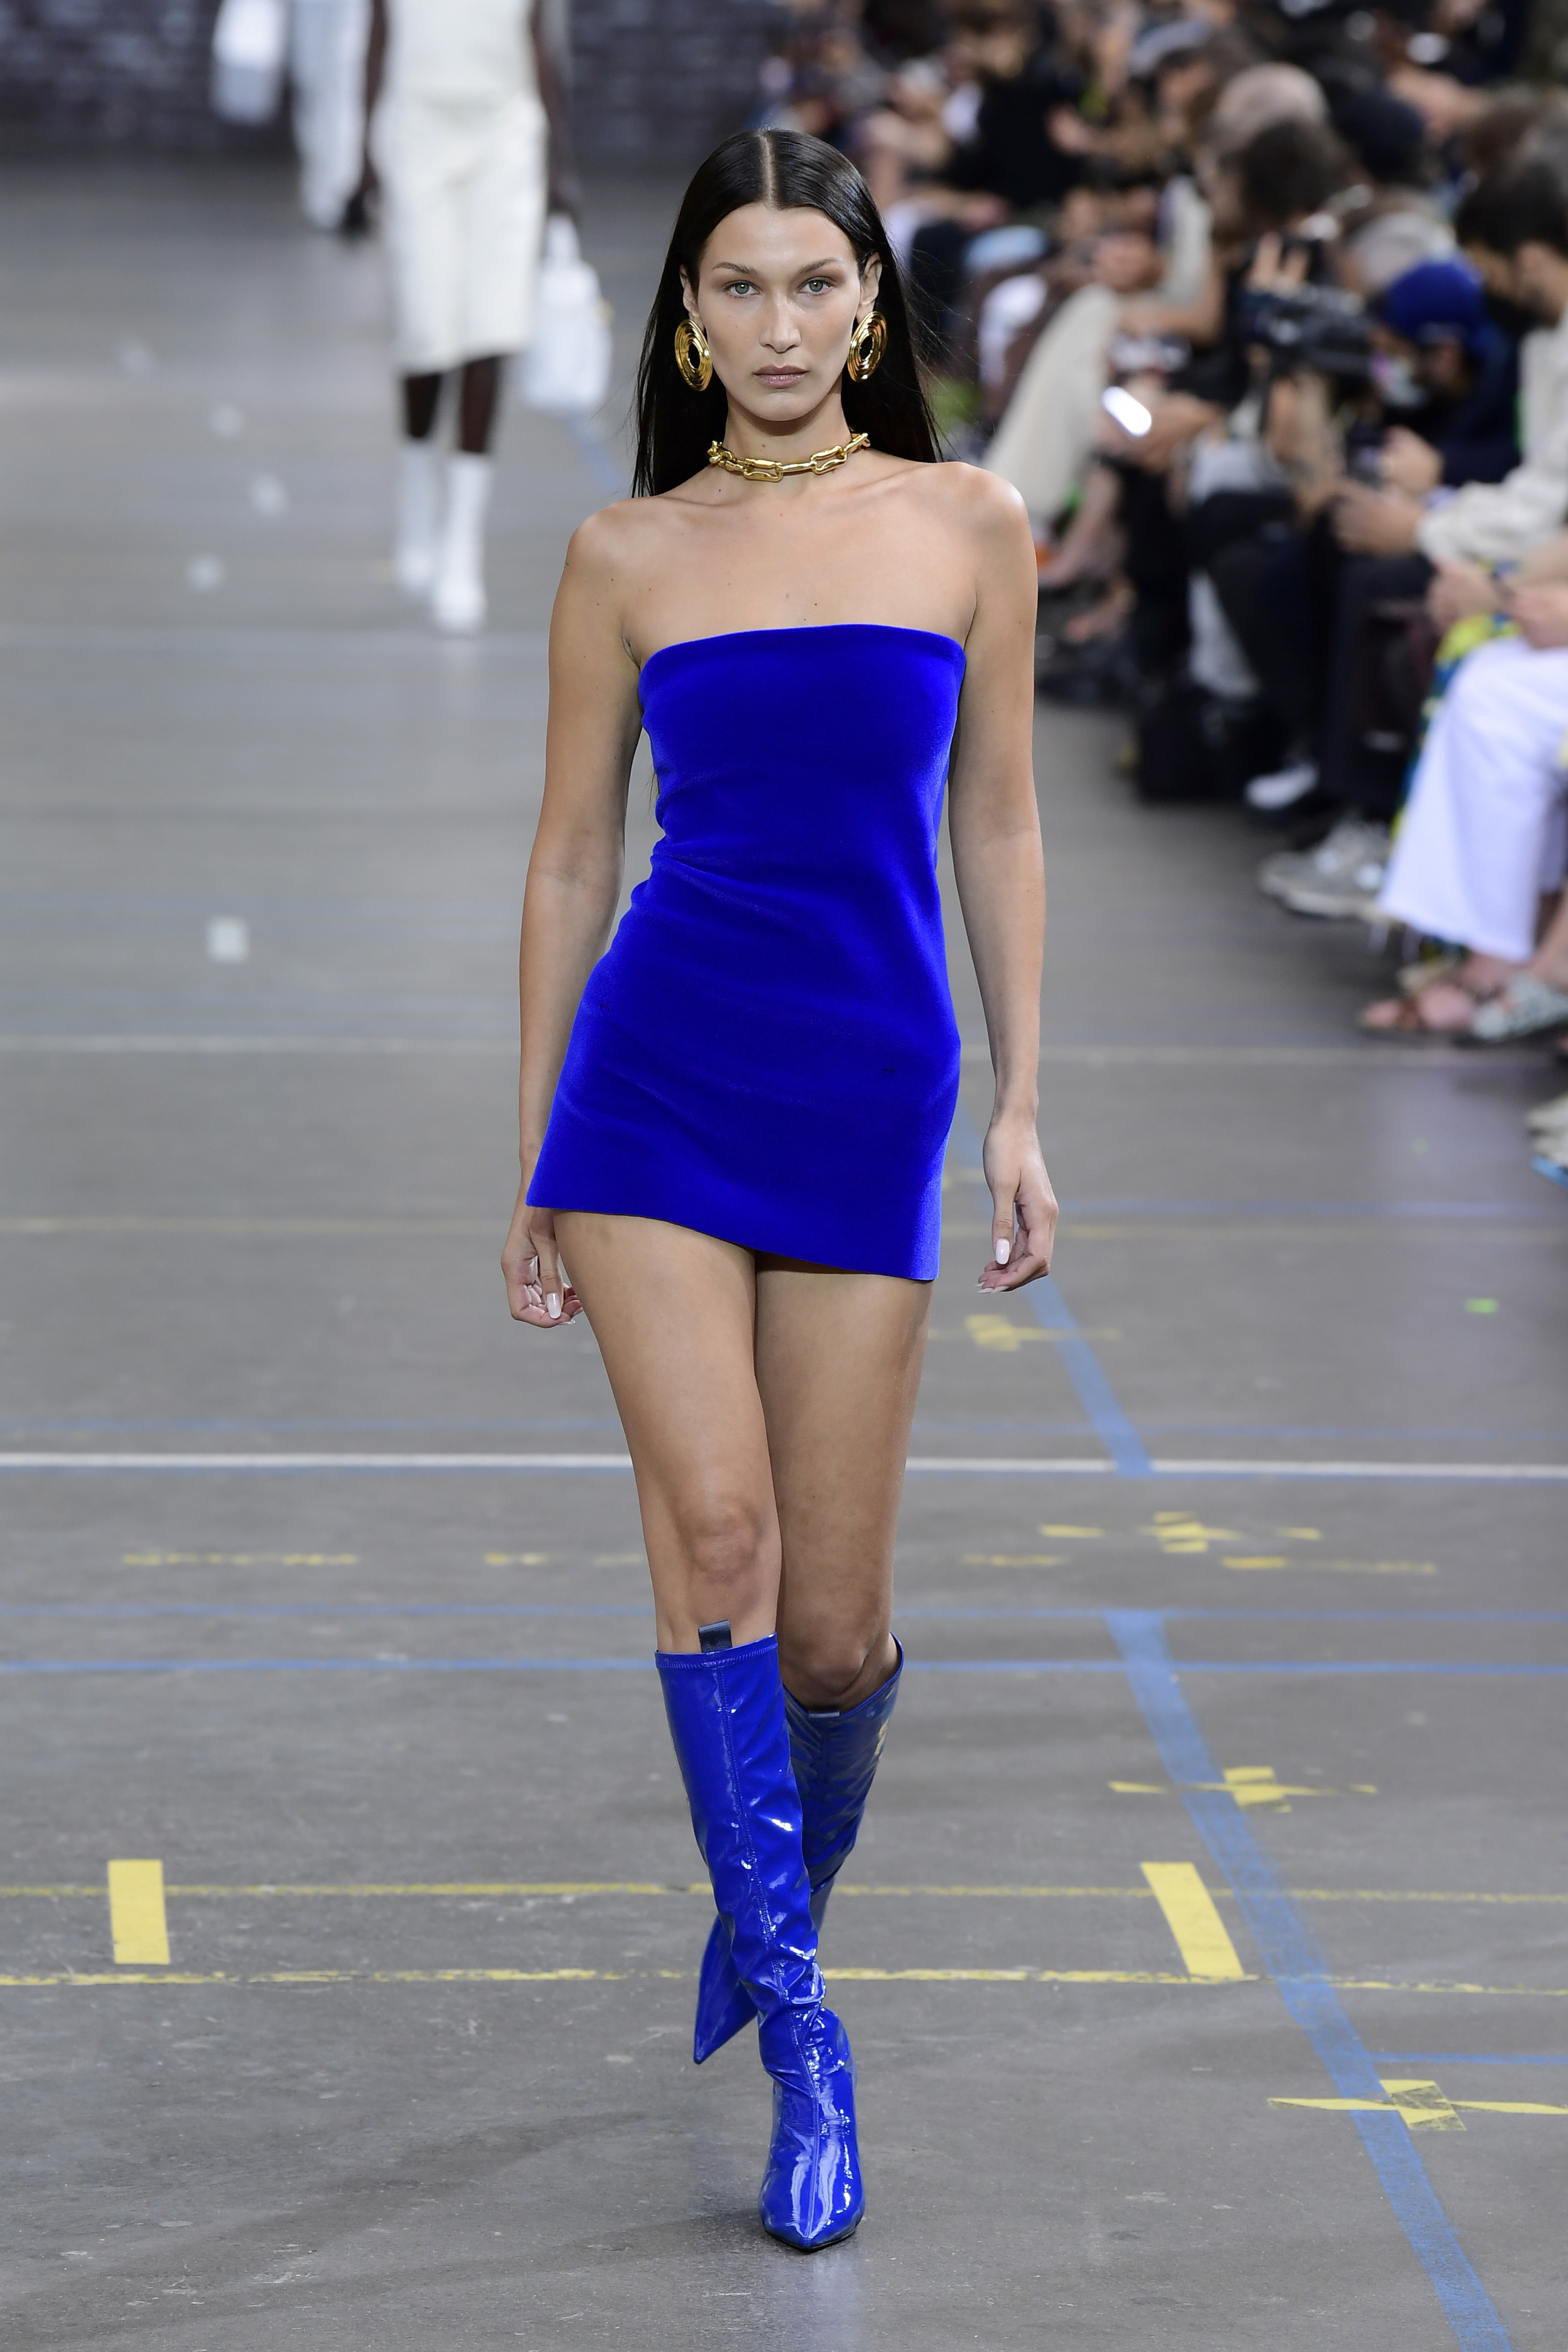 Bella walking the runway in a strapless minidress and matching knee-high boots